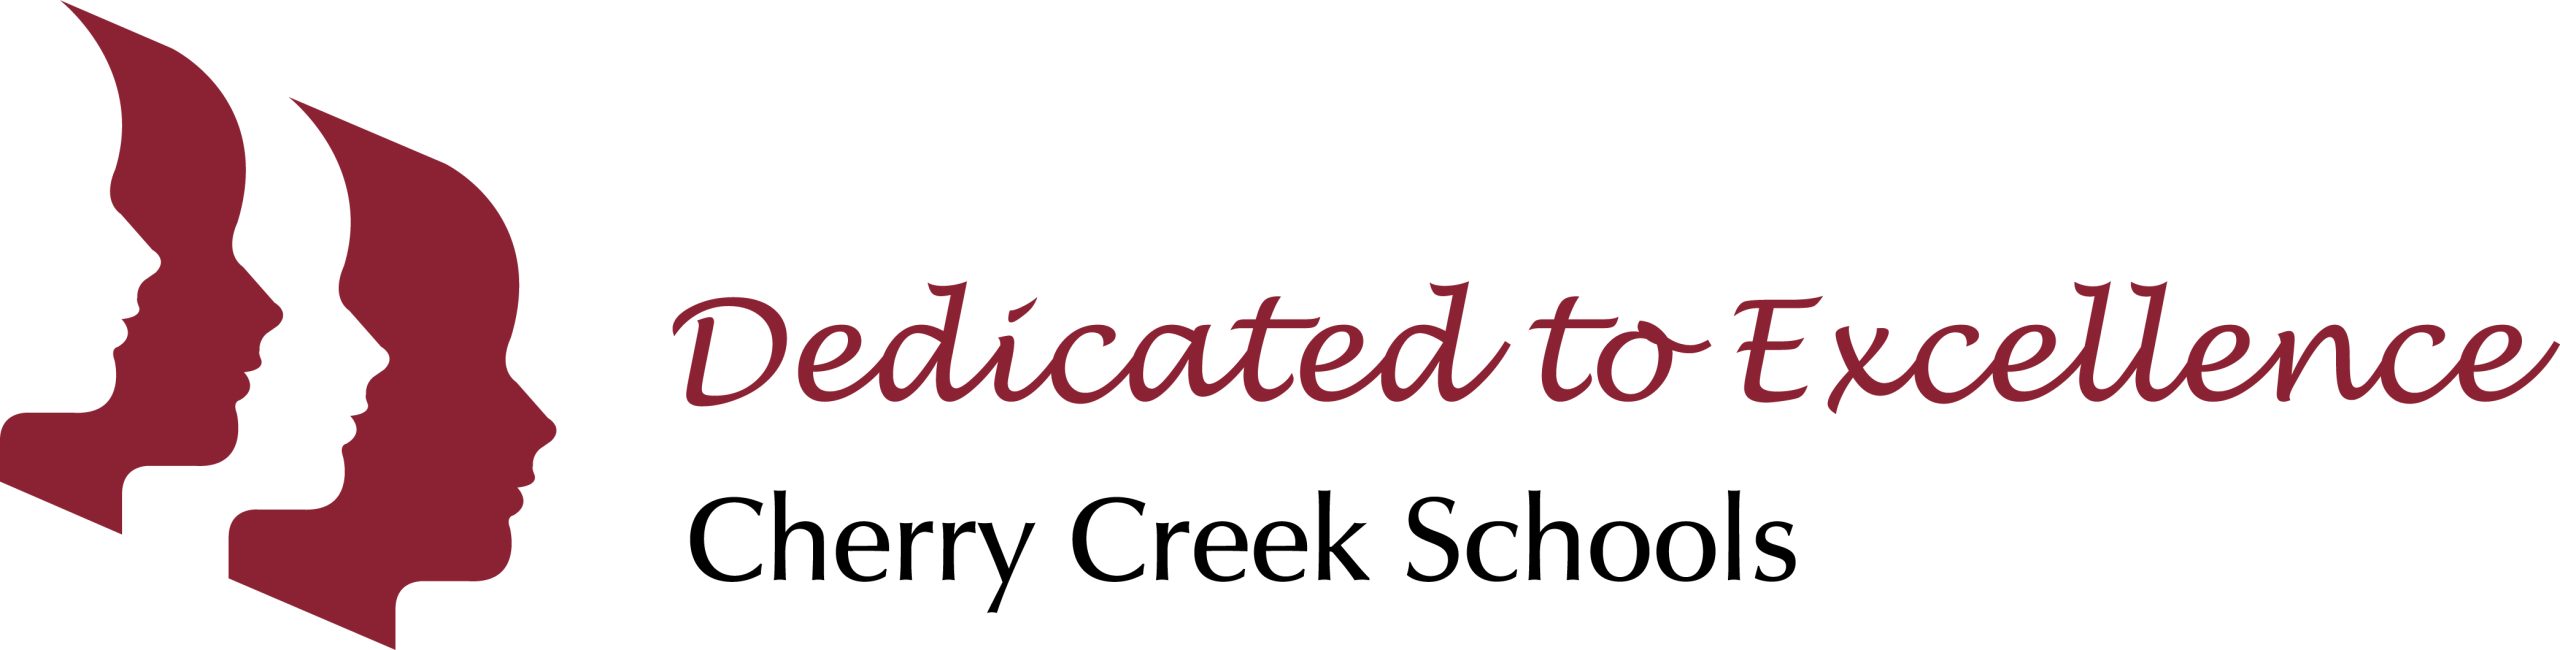 Dedicated to Excellence Cherry Creek Schools